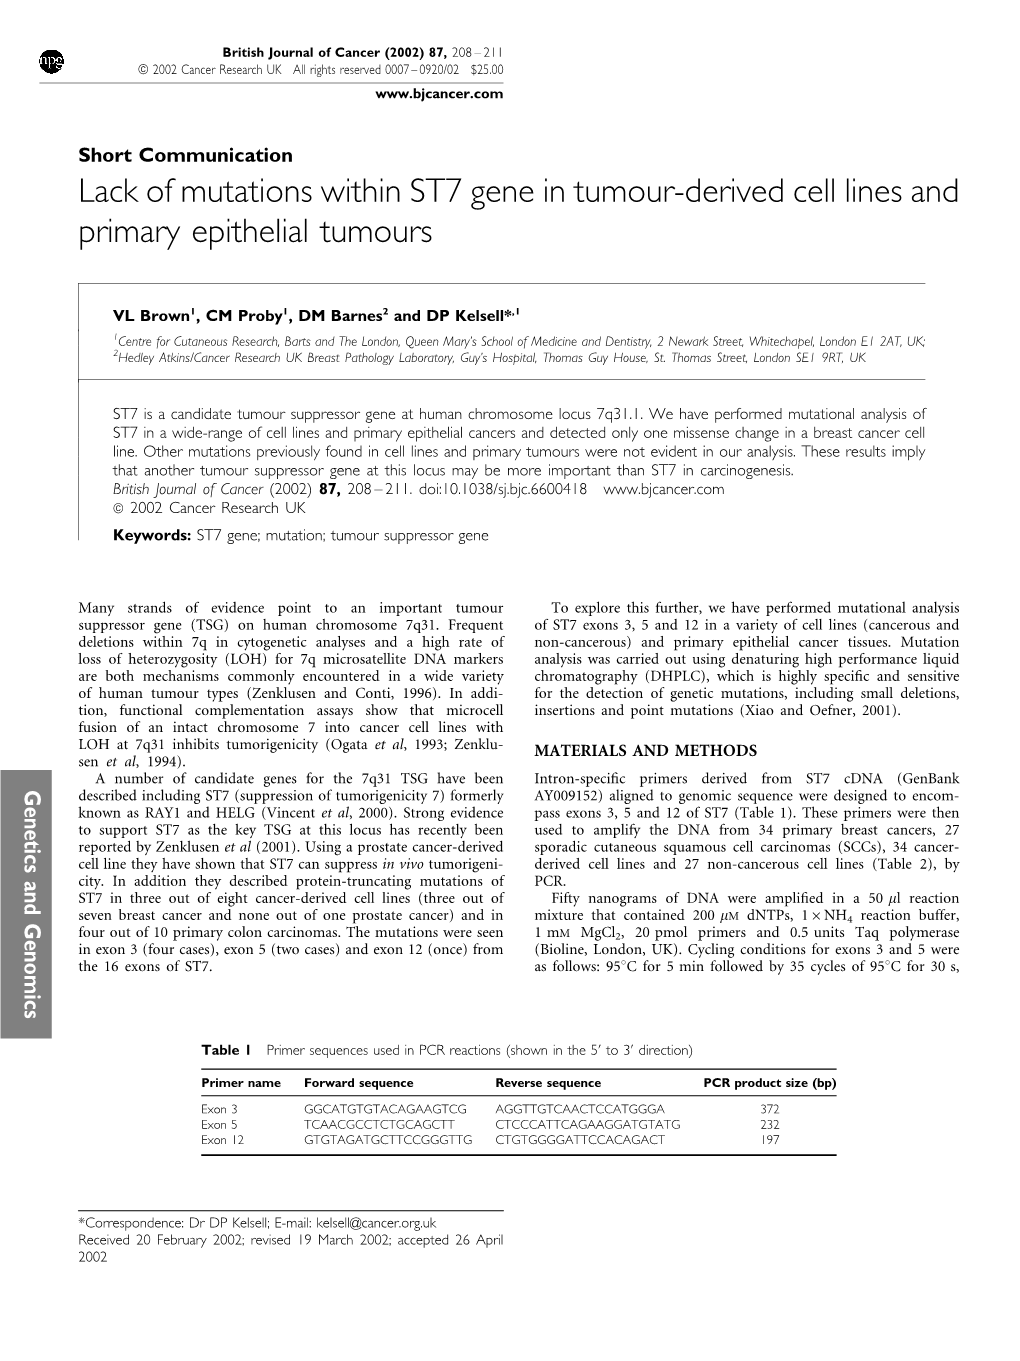 Lack of Mutations Within ST7 Gene in Tumour-Derived Cell Lines and Primary Epithelial Tumours